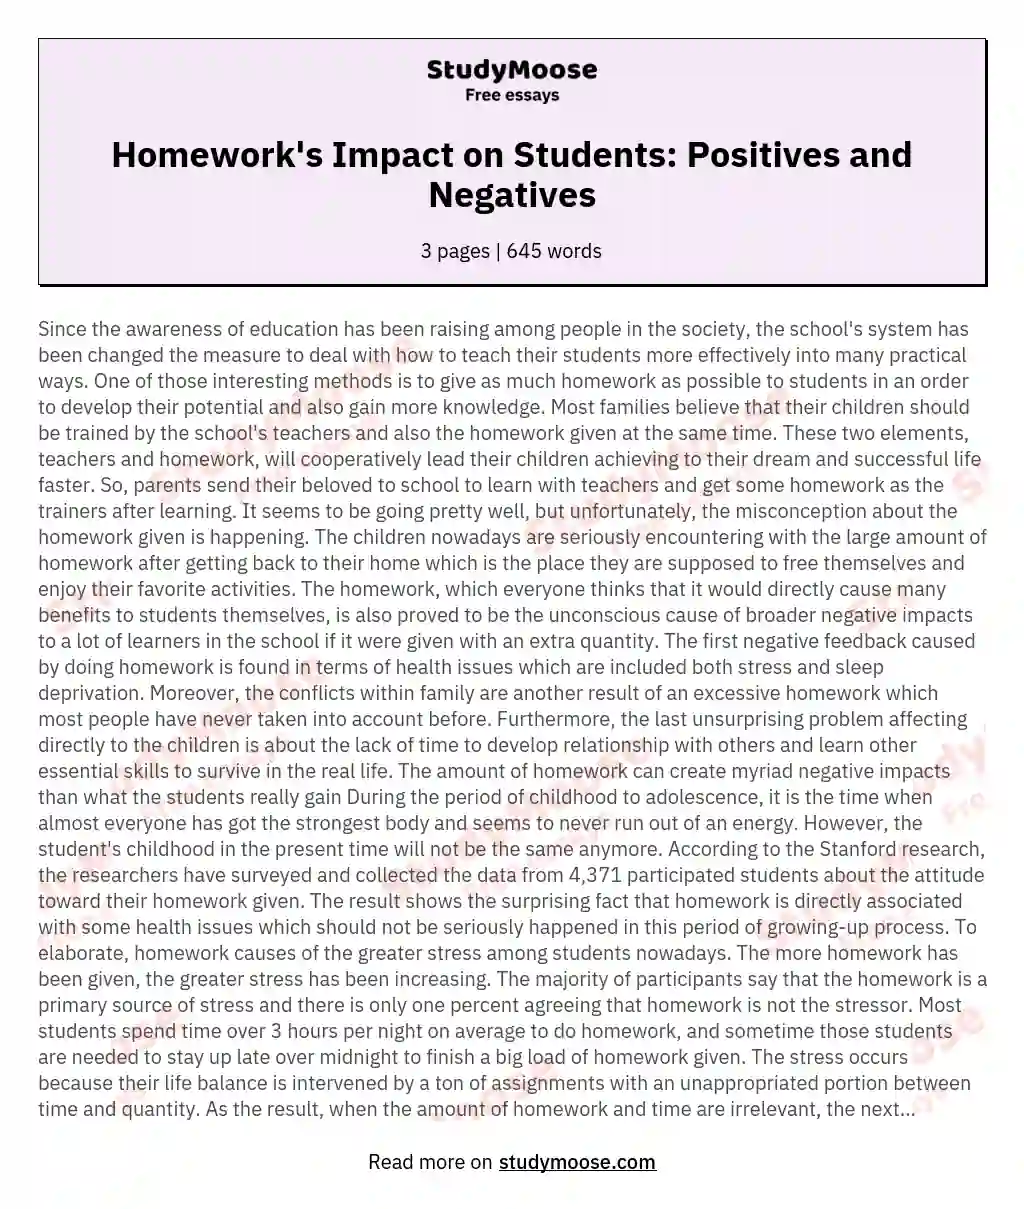 Homework's Impact on Students: Positives and Negatives essay